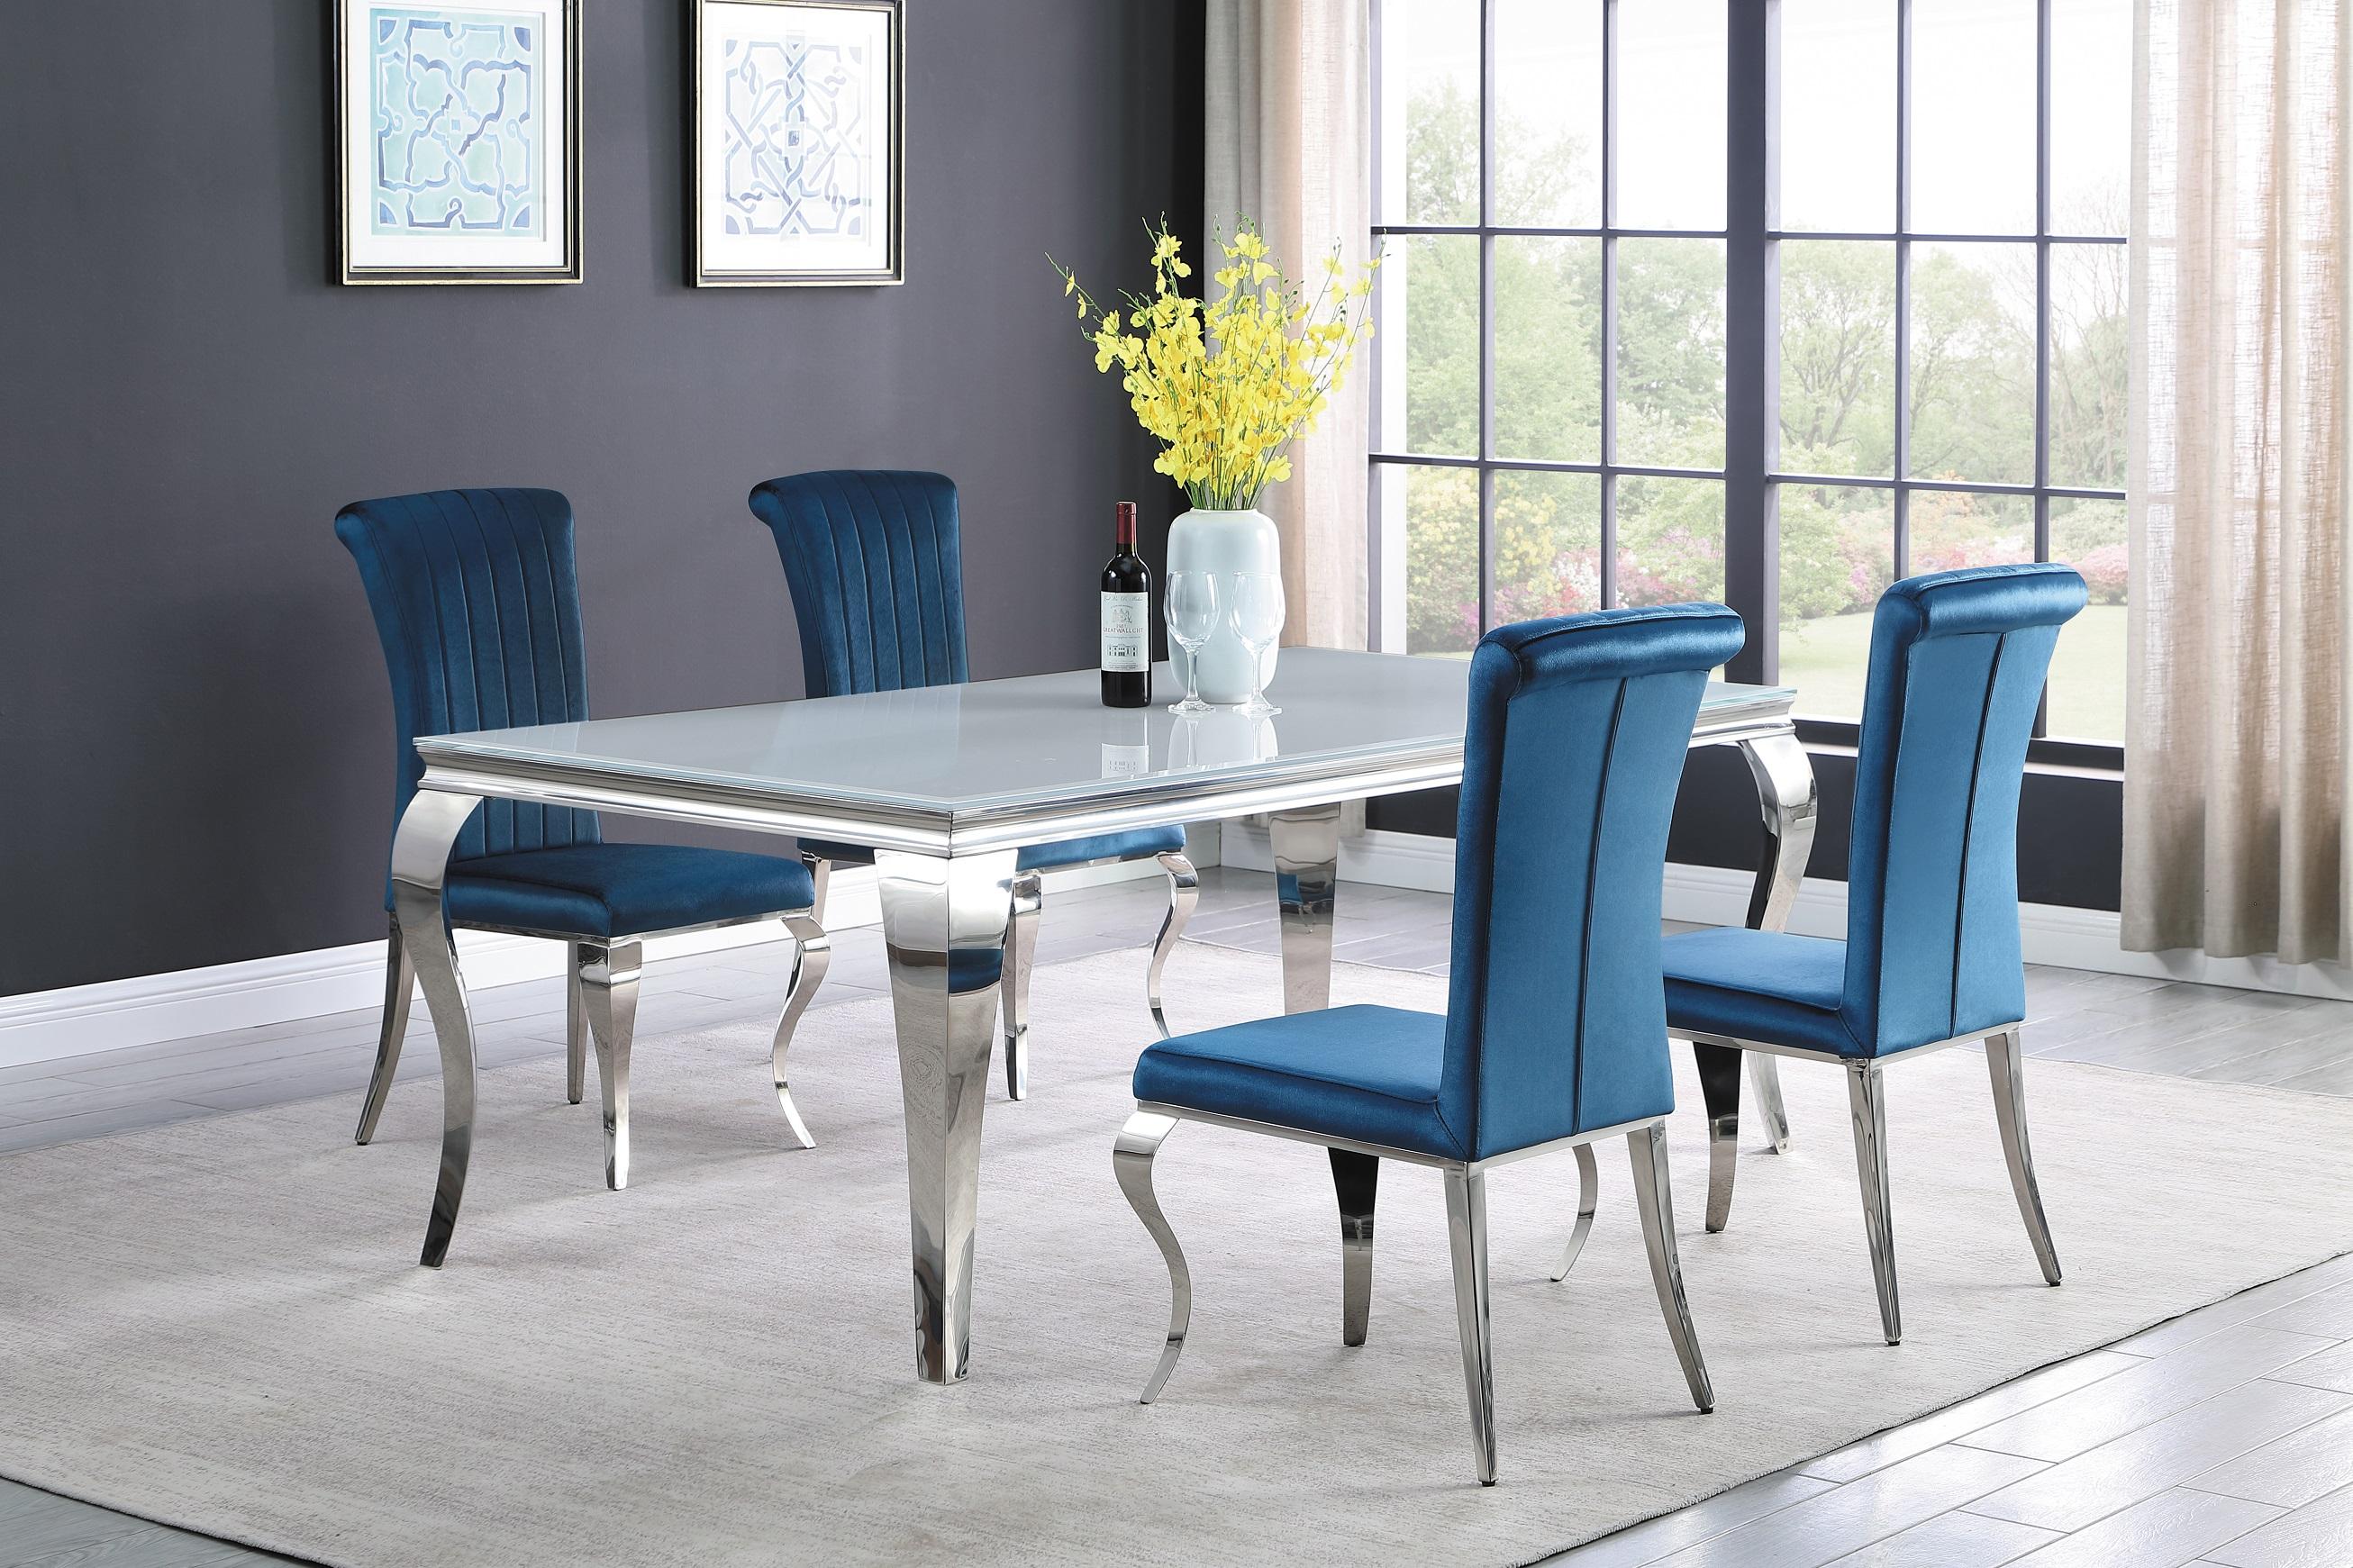 Modern Dining Room Set 115081-TL-S5 Carone 115081-TL-S5 in Teal 